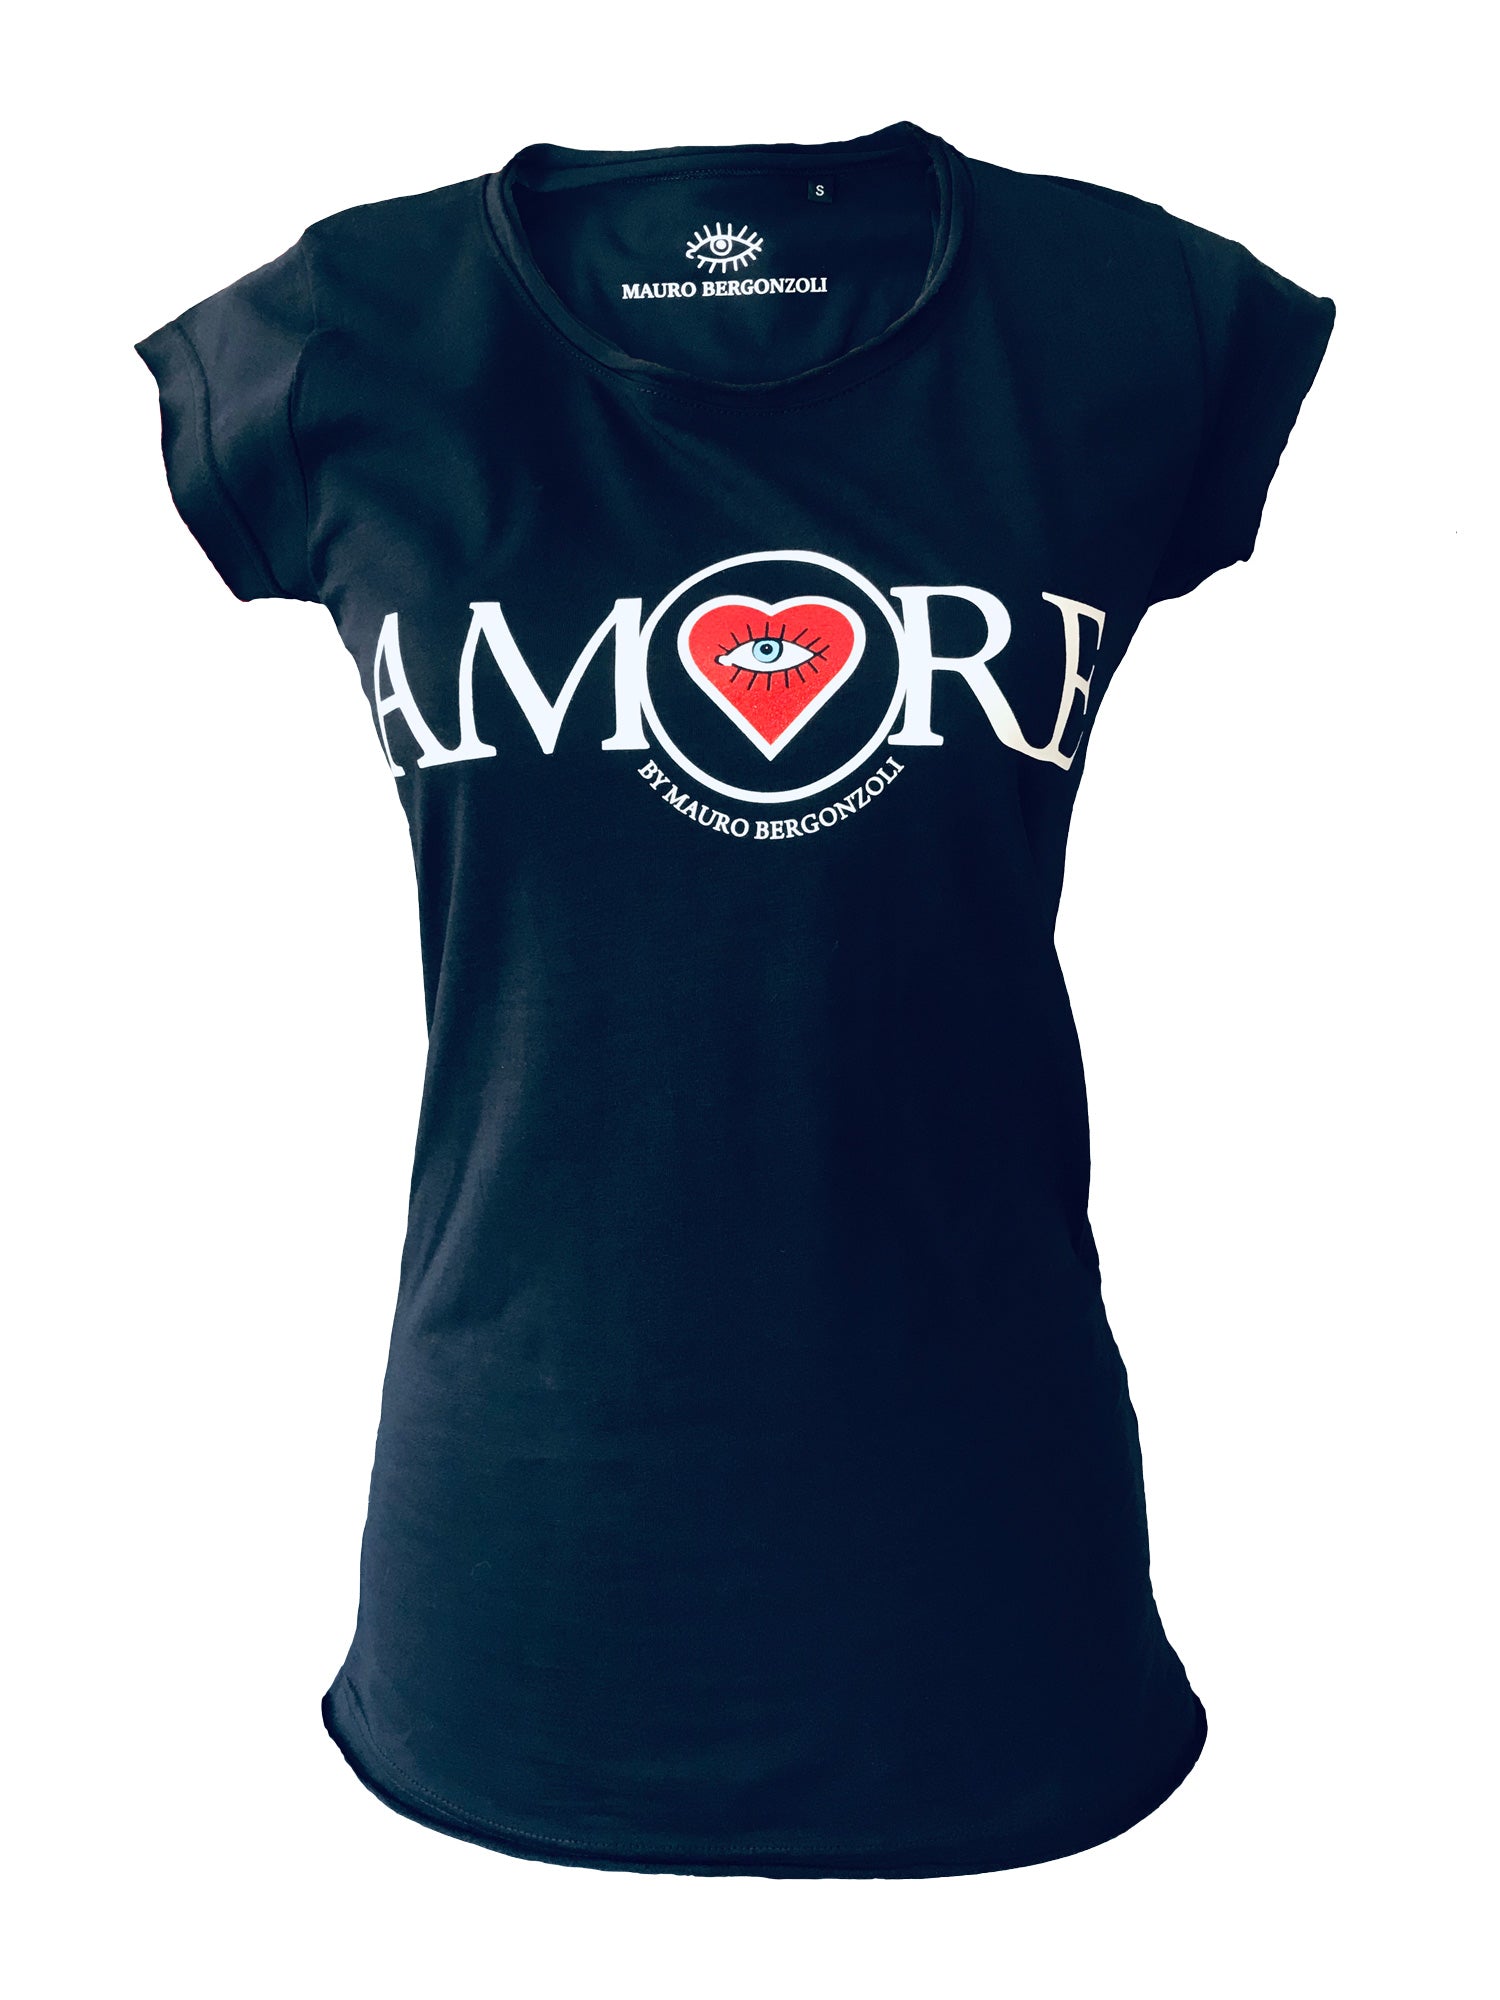 T-Shirt in Colour Navy - AMORE by Mauro Bergonzoli